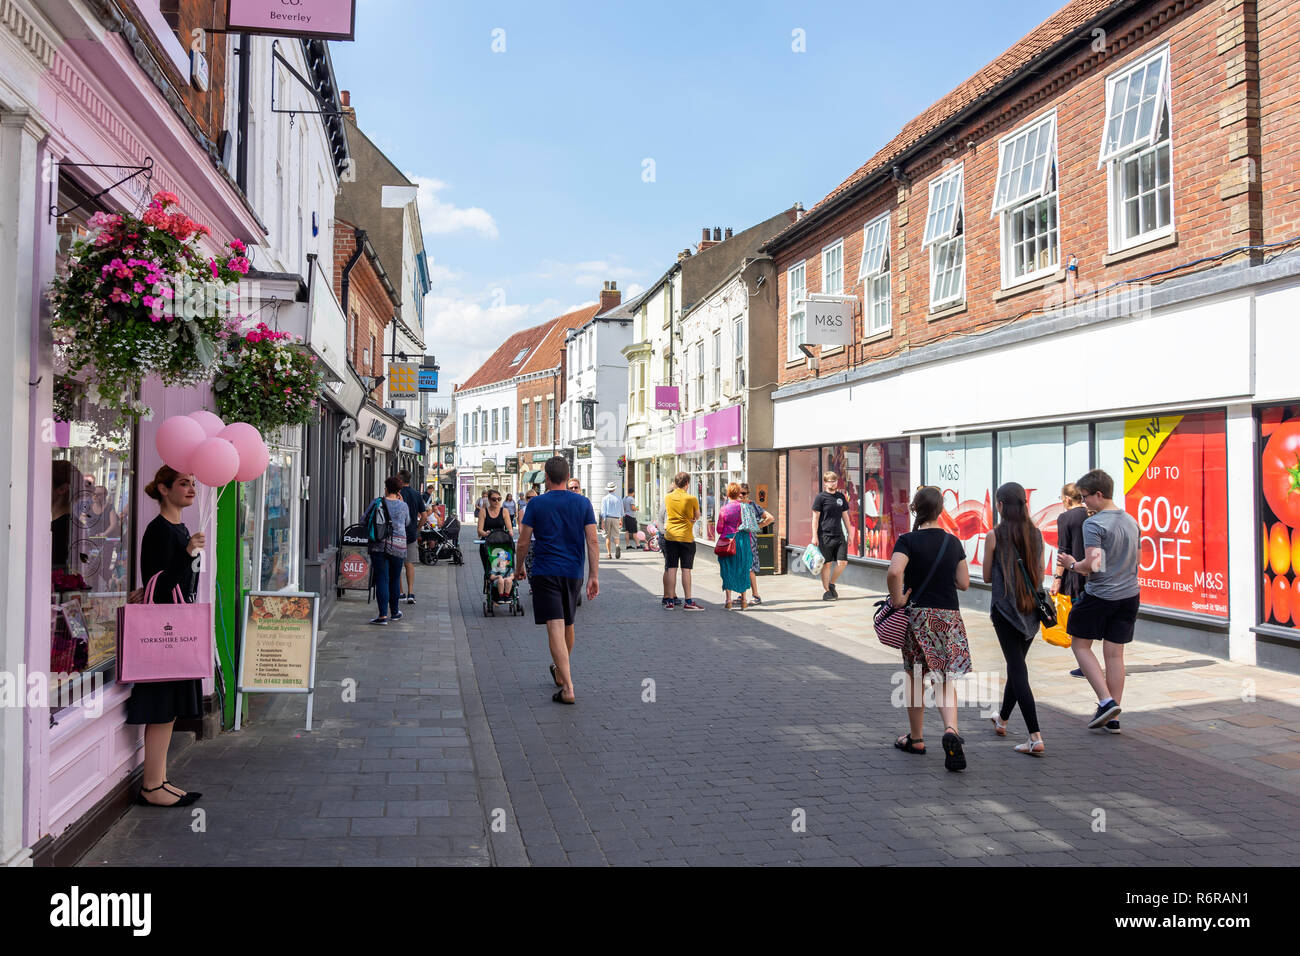 Butcher Row, Beverley, East Riding of Yorkshire, England, United Kingdom Stock Photo